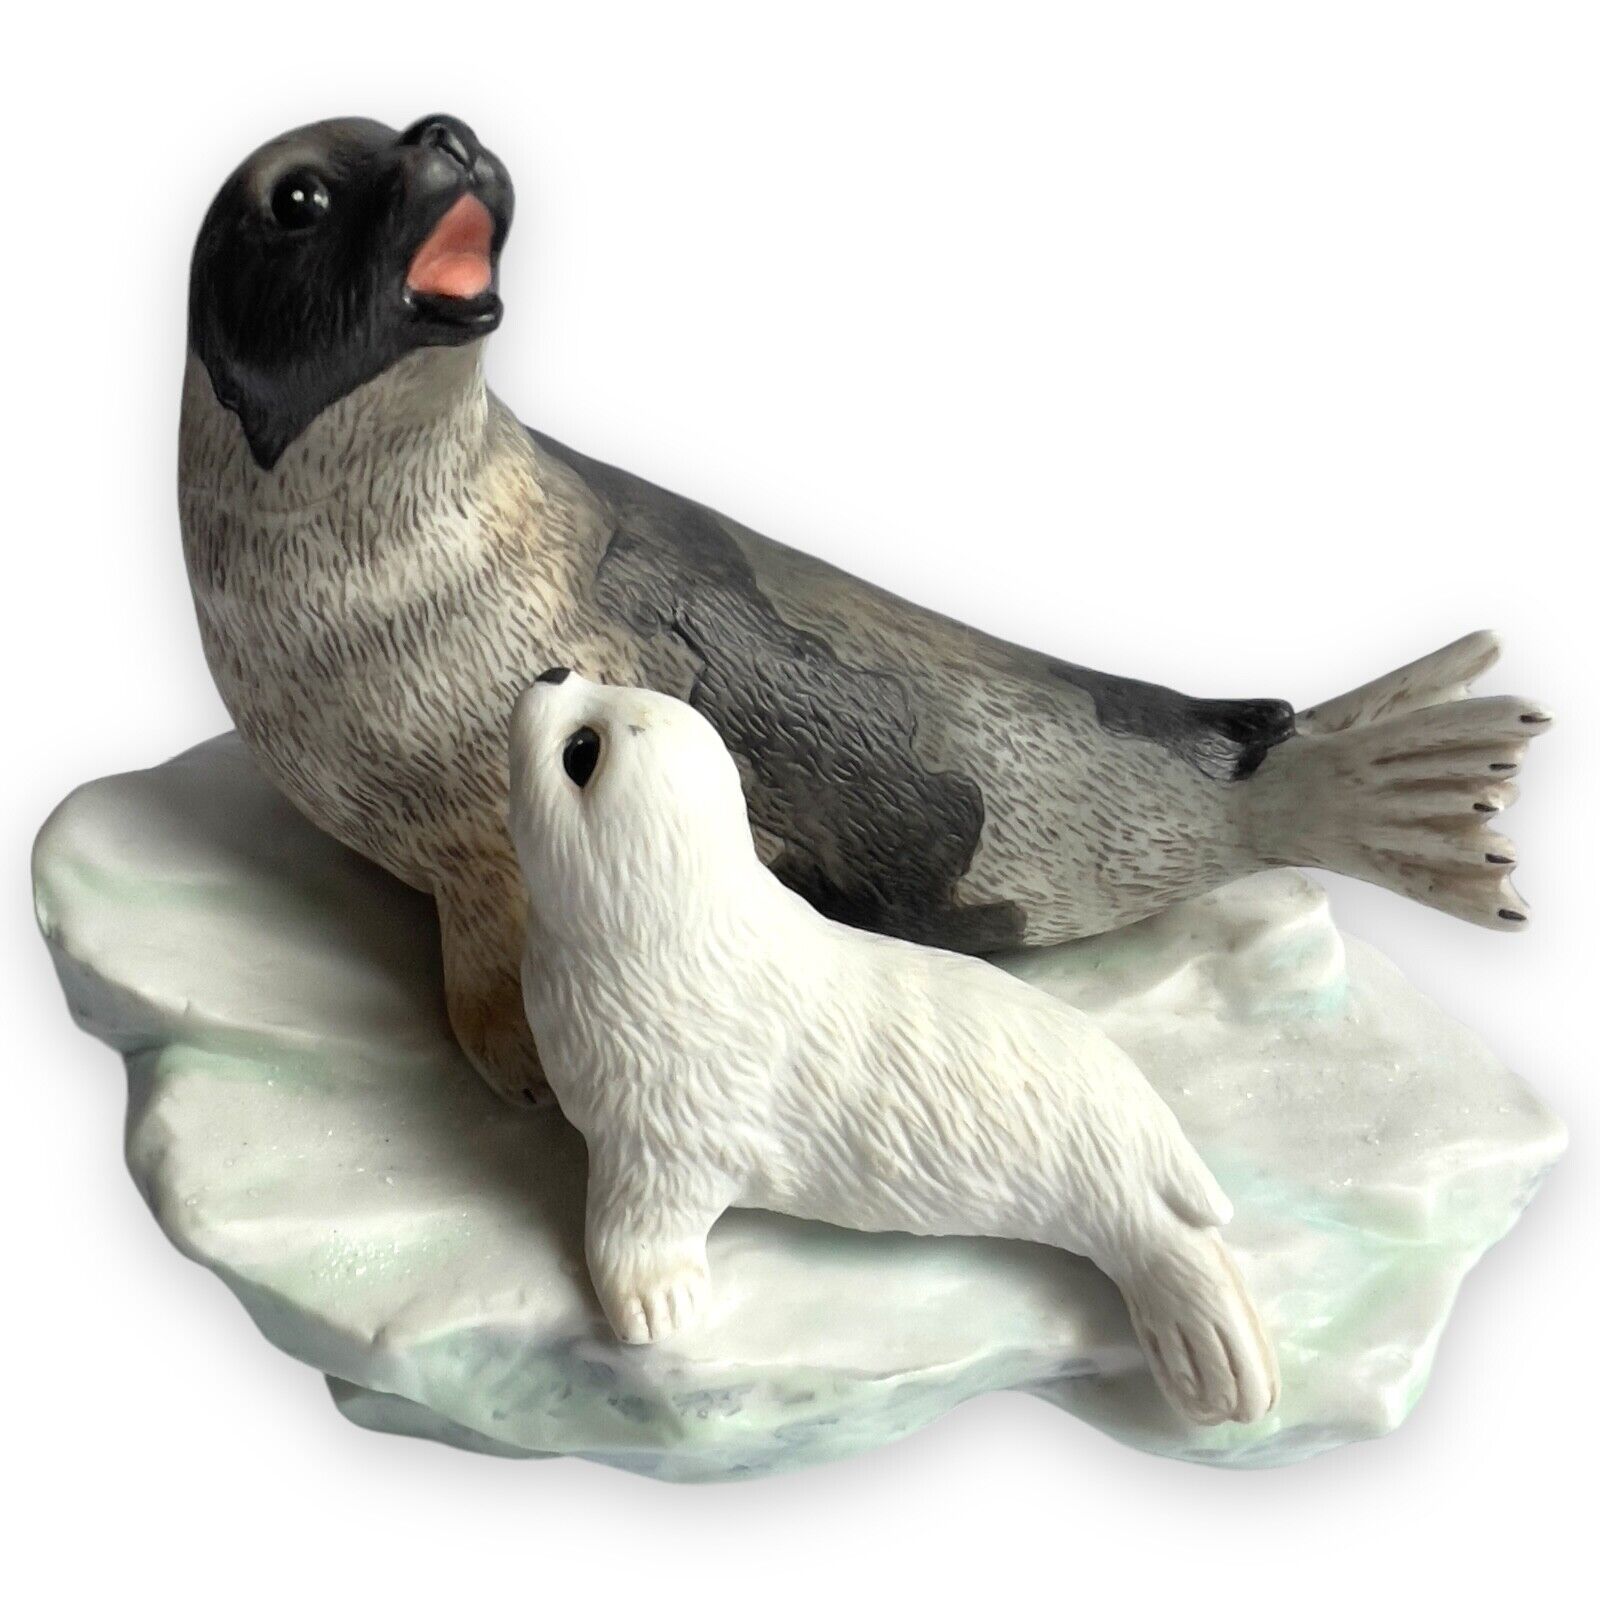 MARURI USA POLAR EXPEDITION PORCELAIN HARP SEALS MOTHER AND CHILD P9007 IN BOX